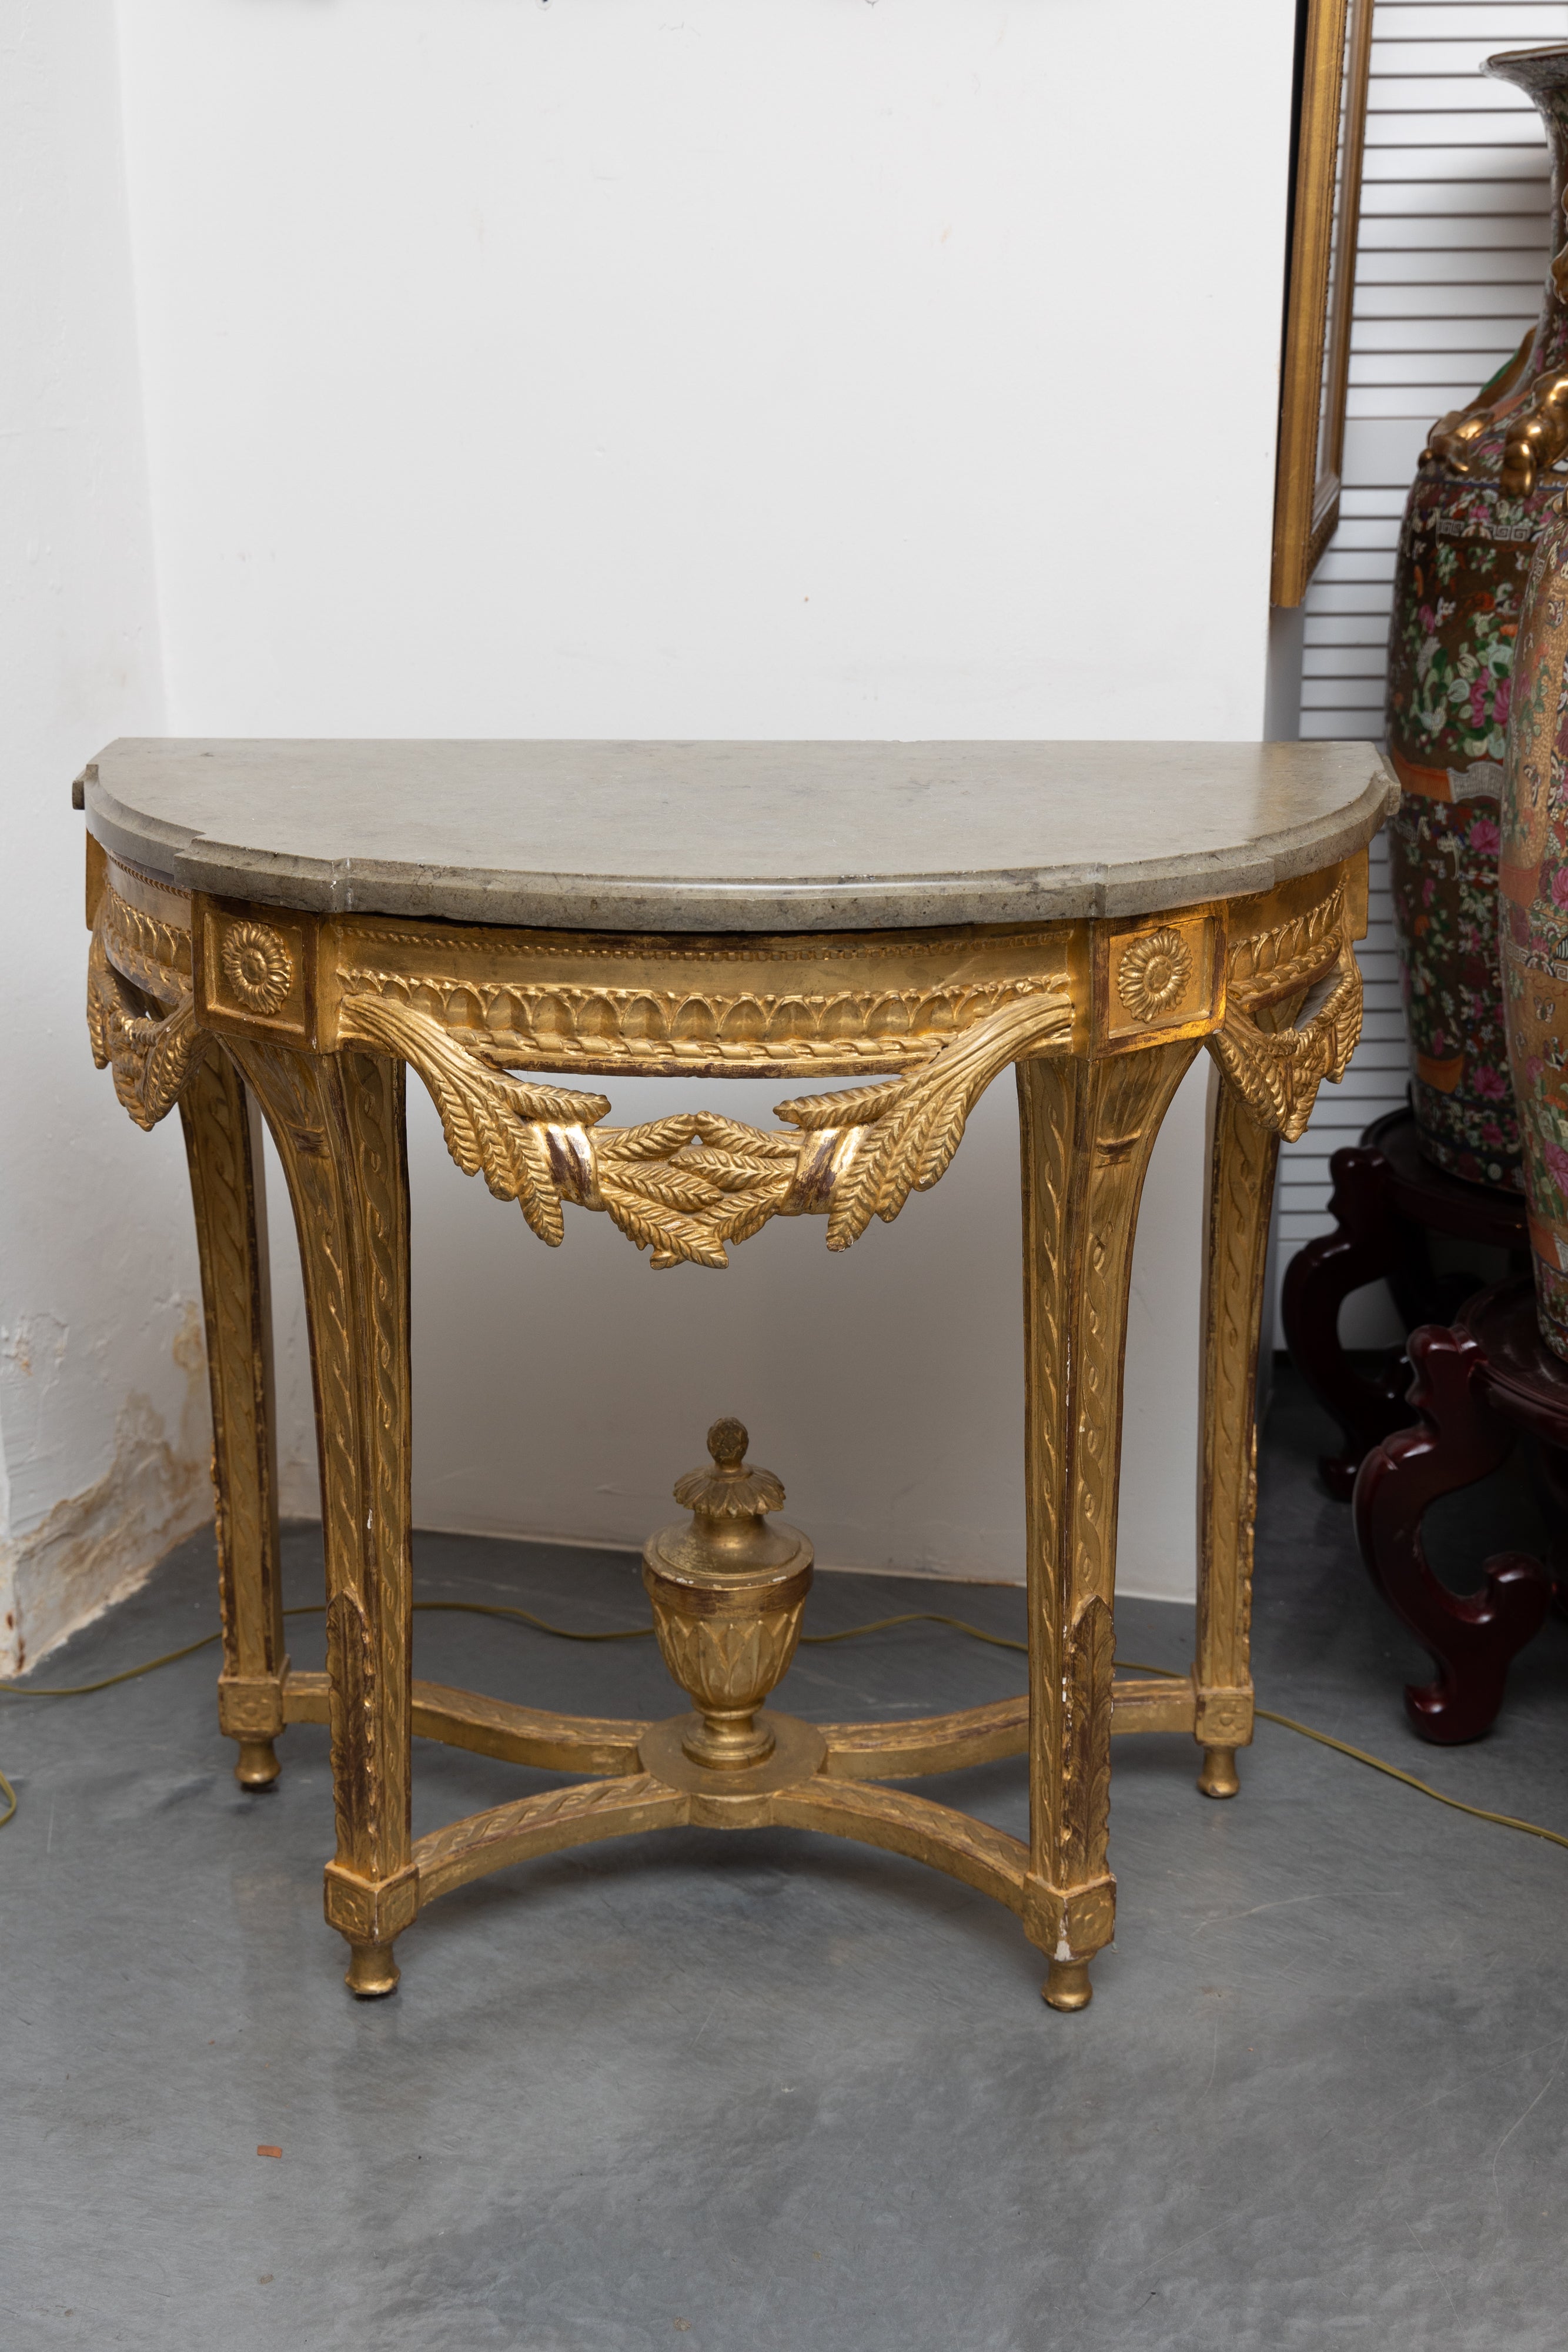 This is a lovely 19th century French Louis XVI demilune gilt console. The gray marble top is over an ornamental frieze with swags representing beards of wheat, supported by square legs and a curved stretcher centered by a prominent urn.